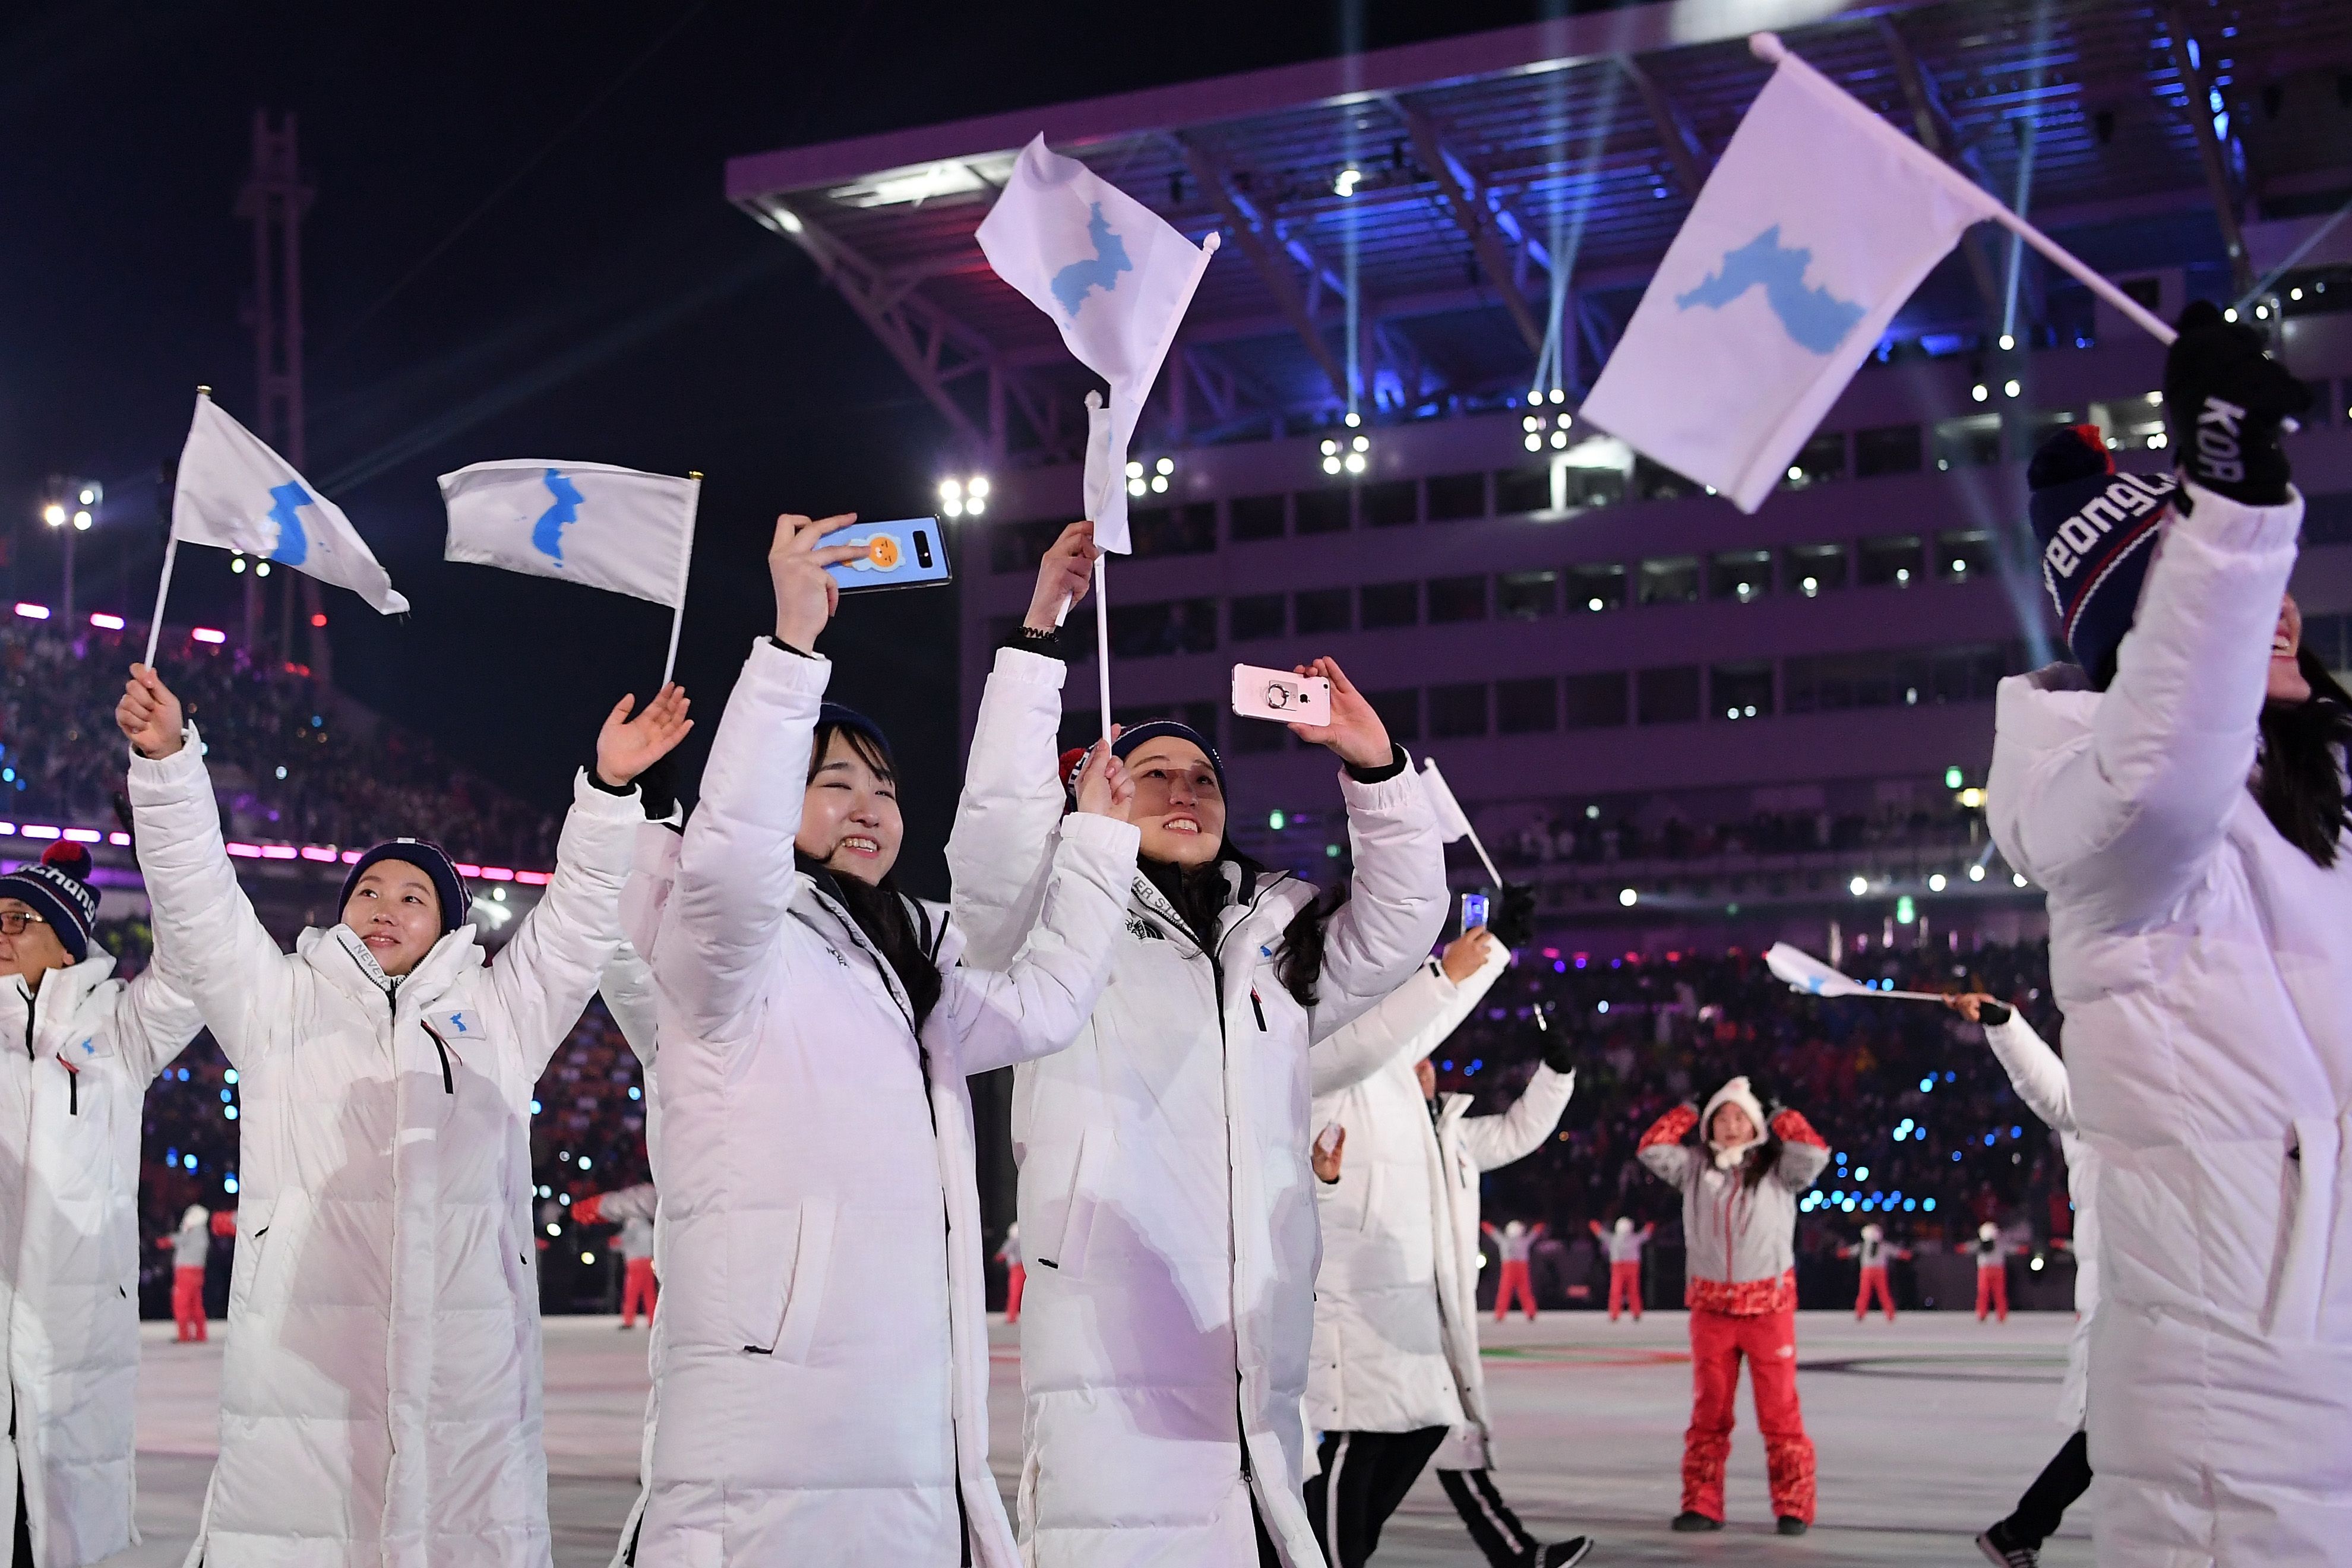 South and North Koreans walk together at the Opening Ceremony wearing all white.